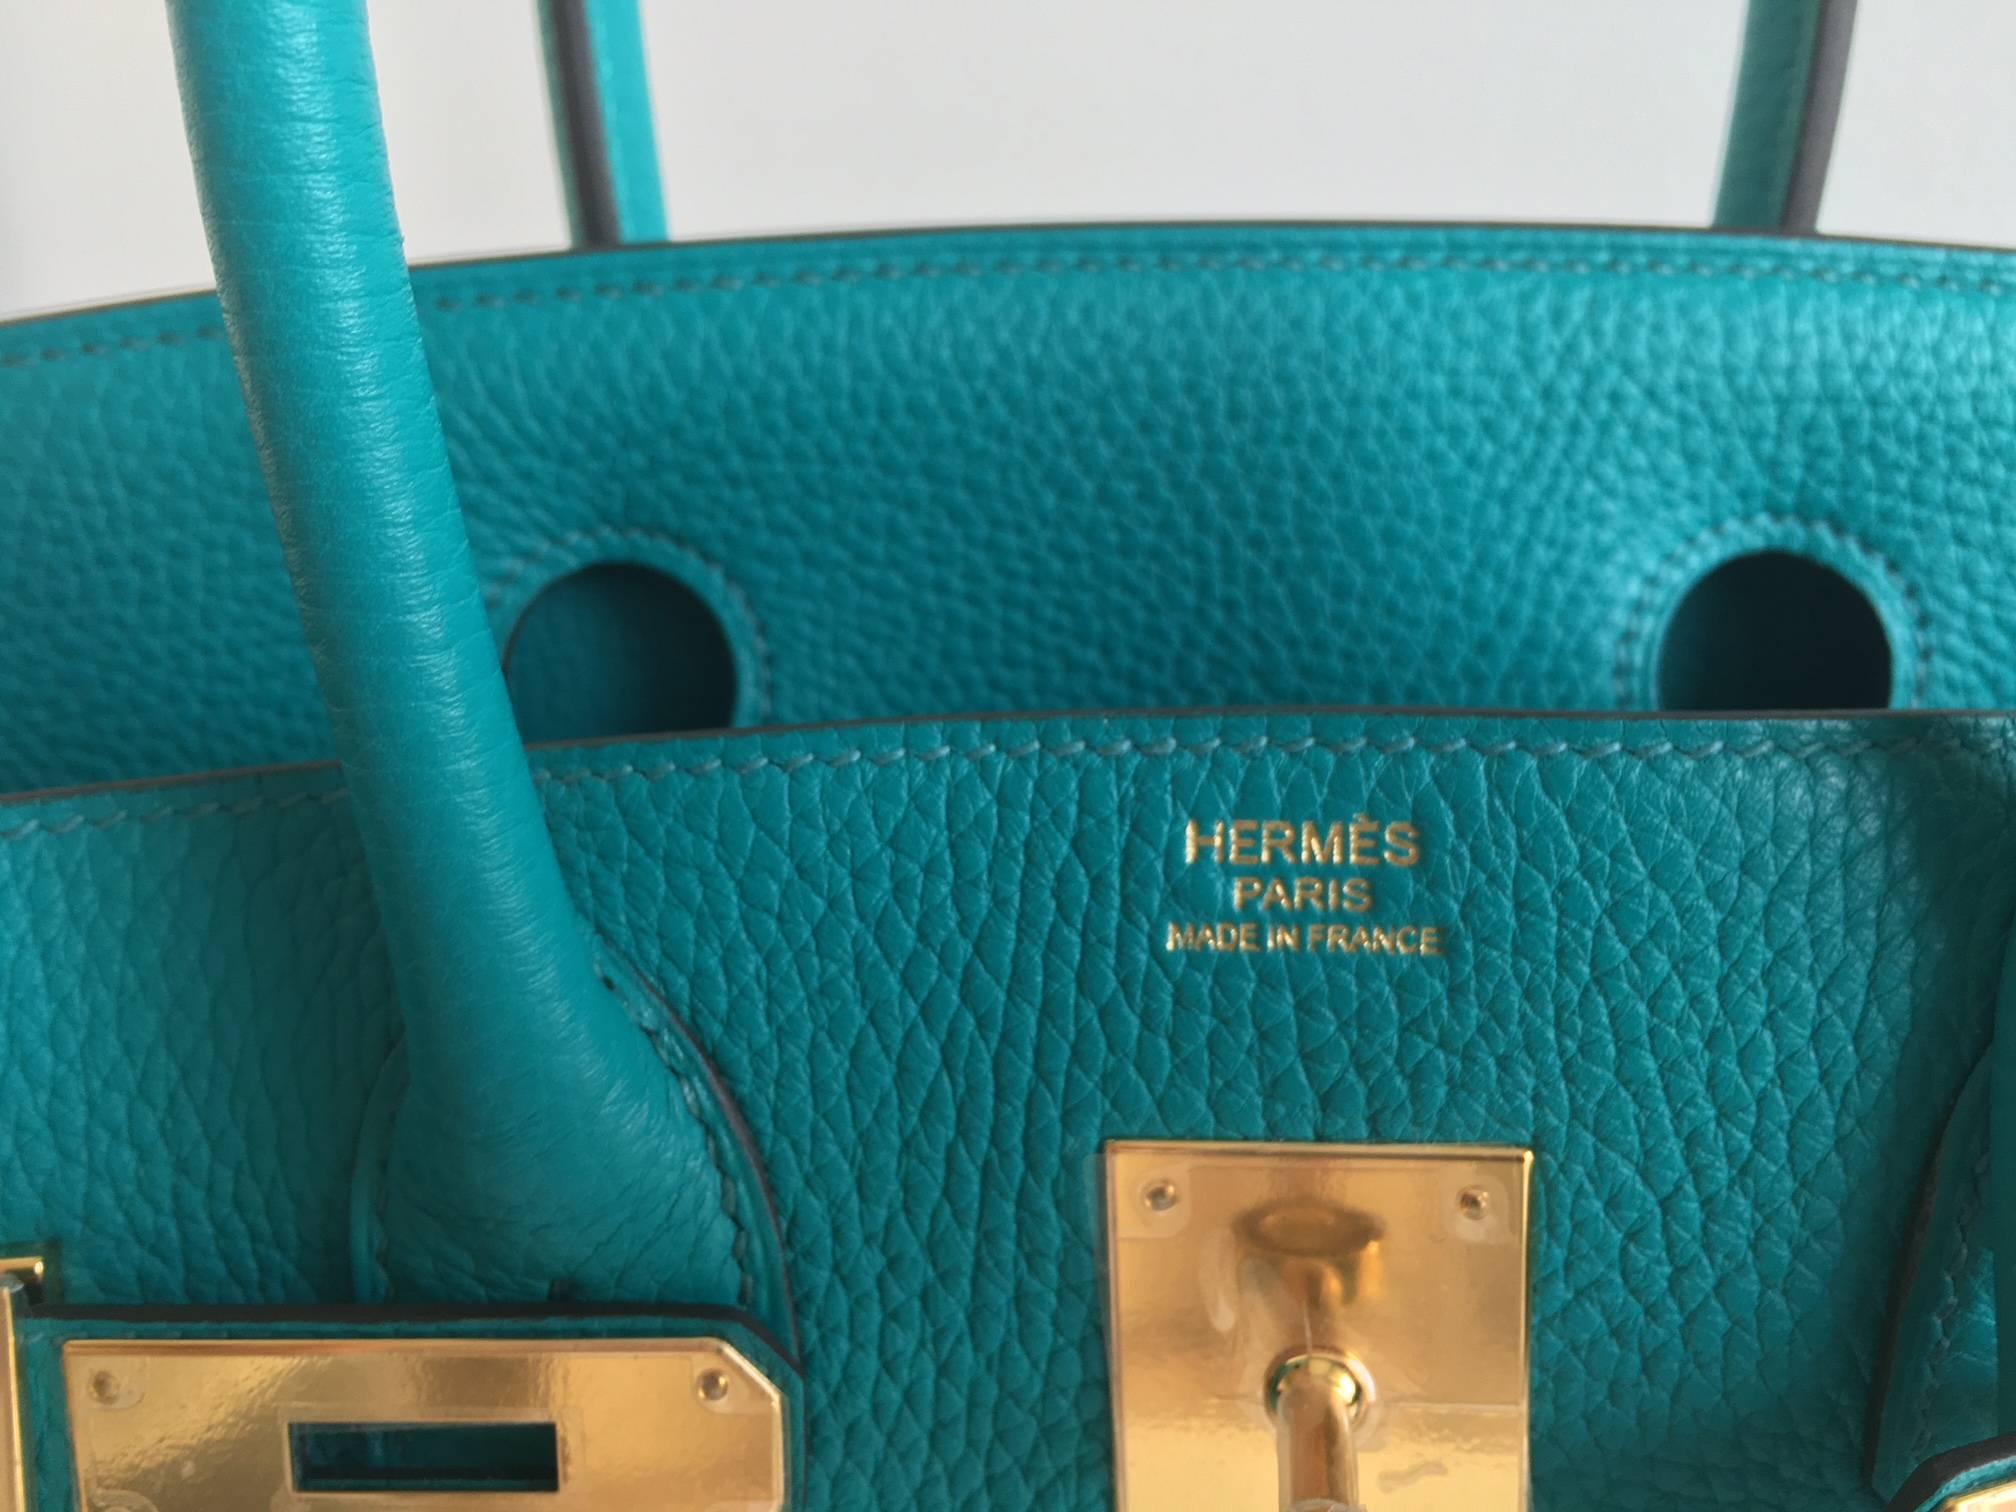 Hermès Paon blue Birkin 30 cm handbag. In the new Paon (peacock) blue color and Clemency leather. The hardware is gold. Stitching in matching Paon color. The bag come with the original box, dust bag and accouterments. Date stamp X for